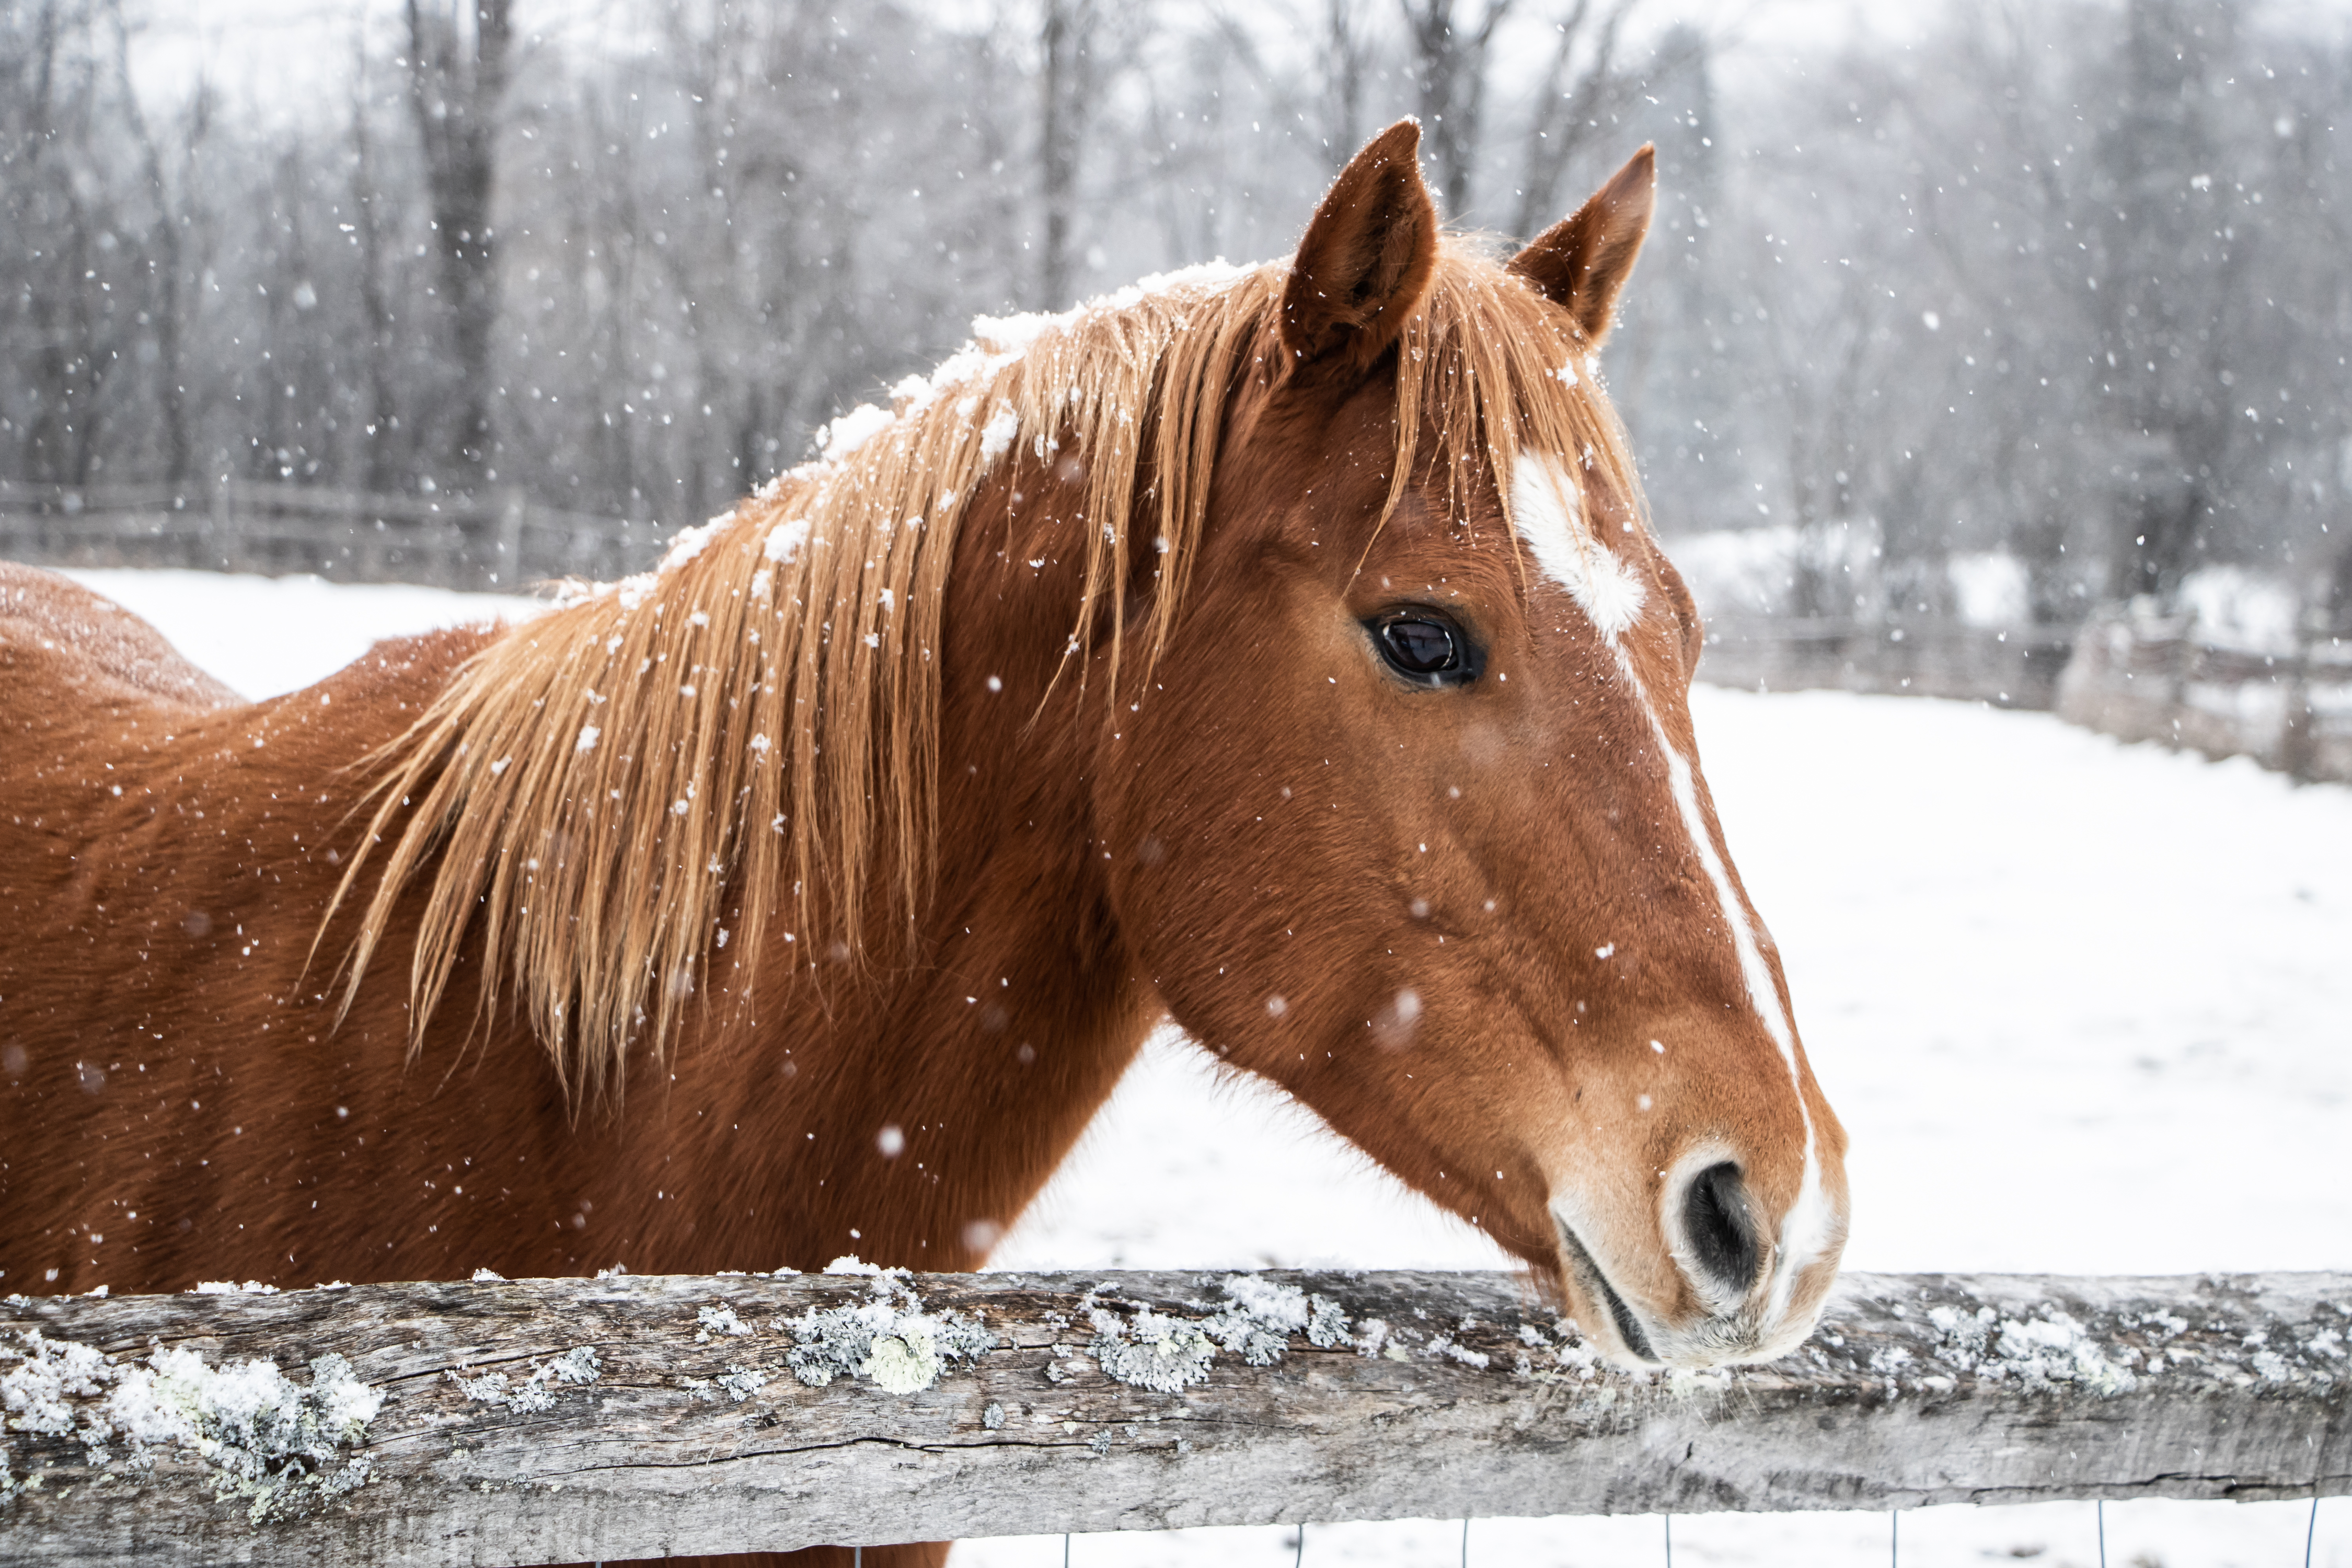 From Hoof Care to Hydration: Winter Tips for Horse Owners